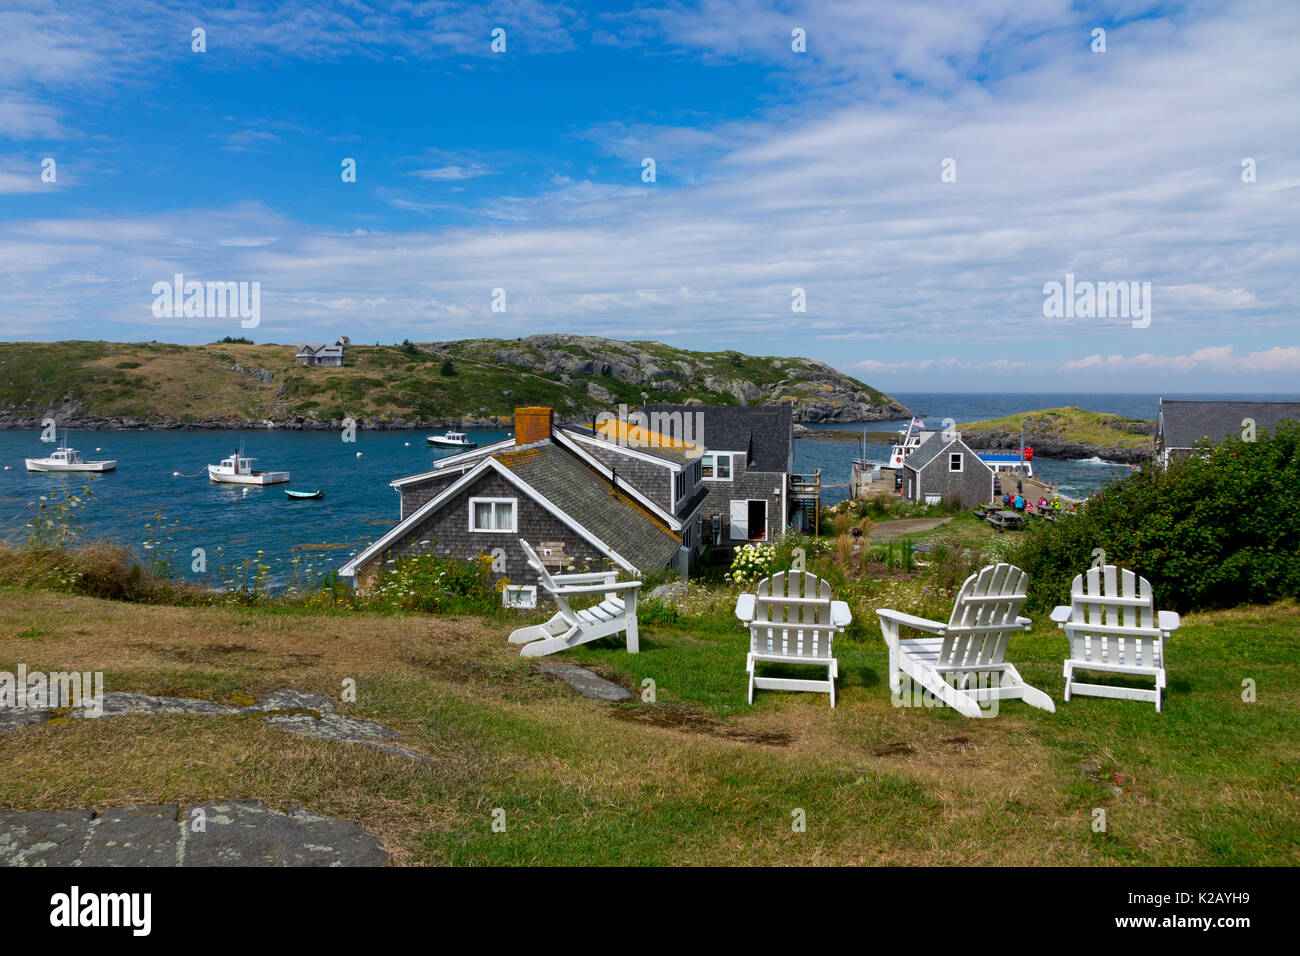 USA Maine ME Monhegan Island in Penobscot Bay in the Atlantic Ocean Adirondack chairs on a lawn Stock Photo